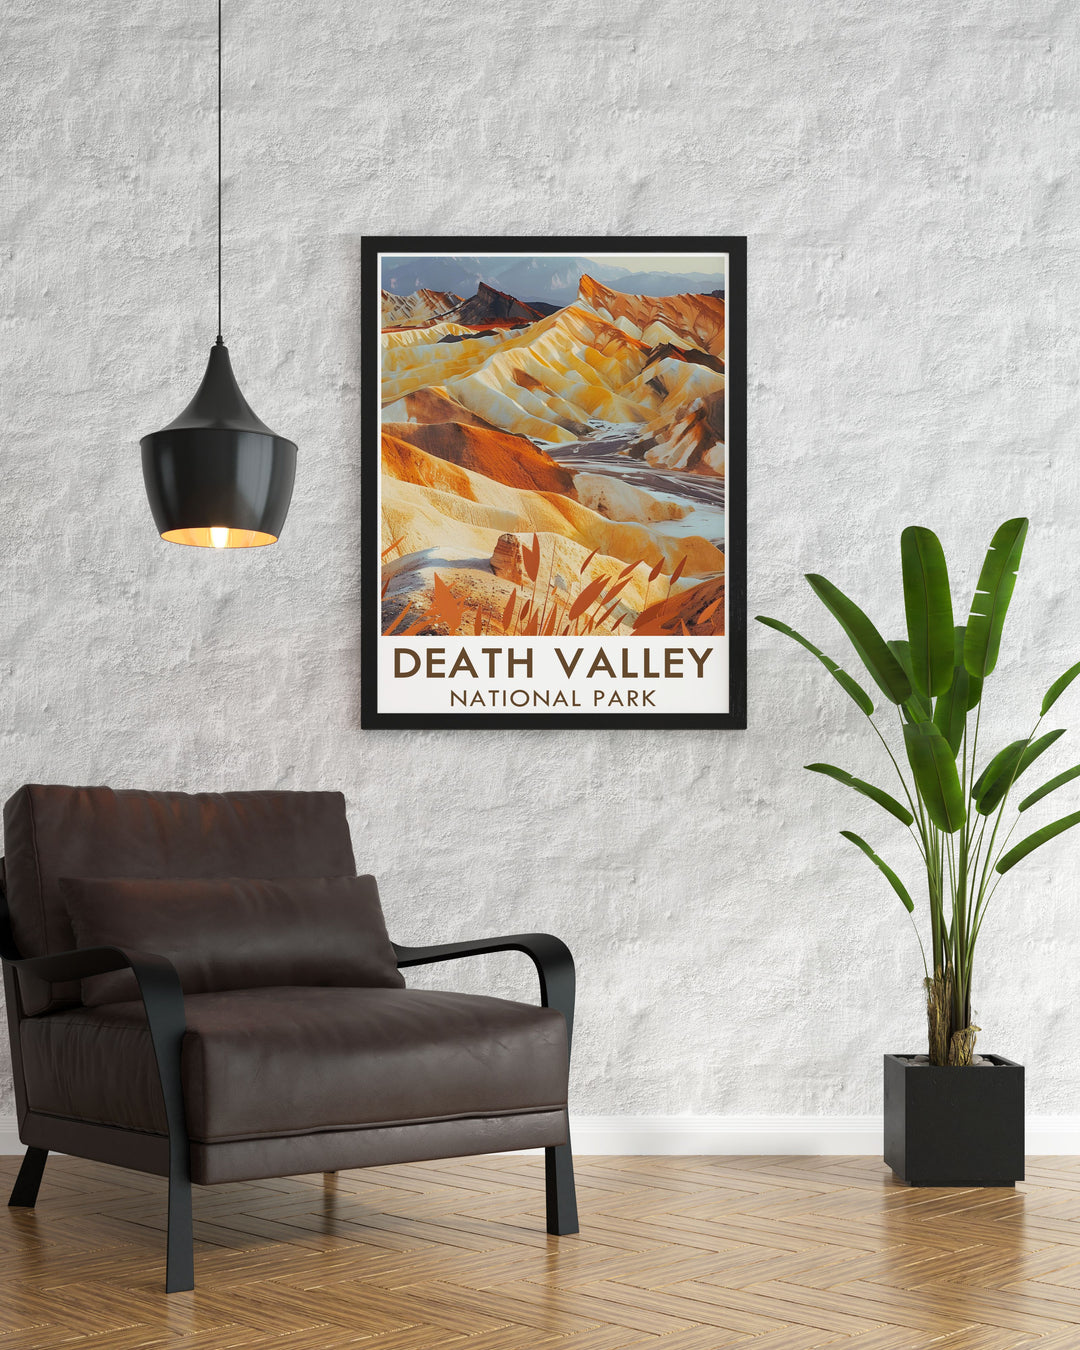 A detailed print of Death Valley National Park showcasing the expansive desert landscape and the iconic Zabriskie Point, perfect for nature enthusiasts and those who appreciate unique geological features.